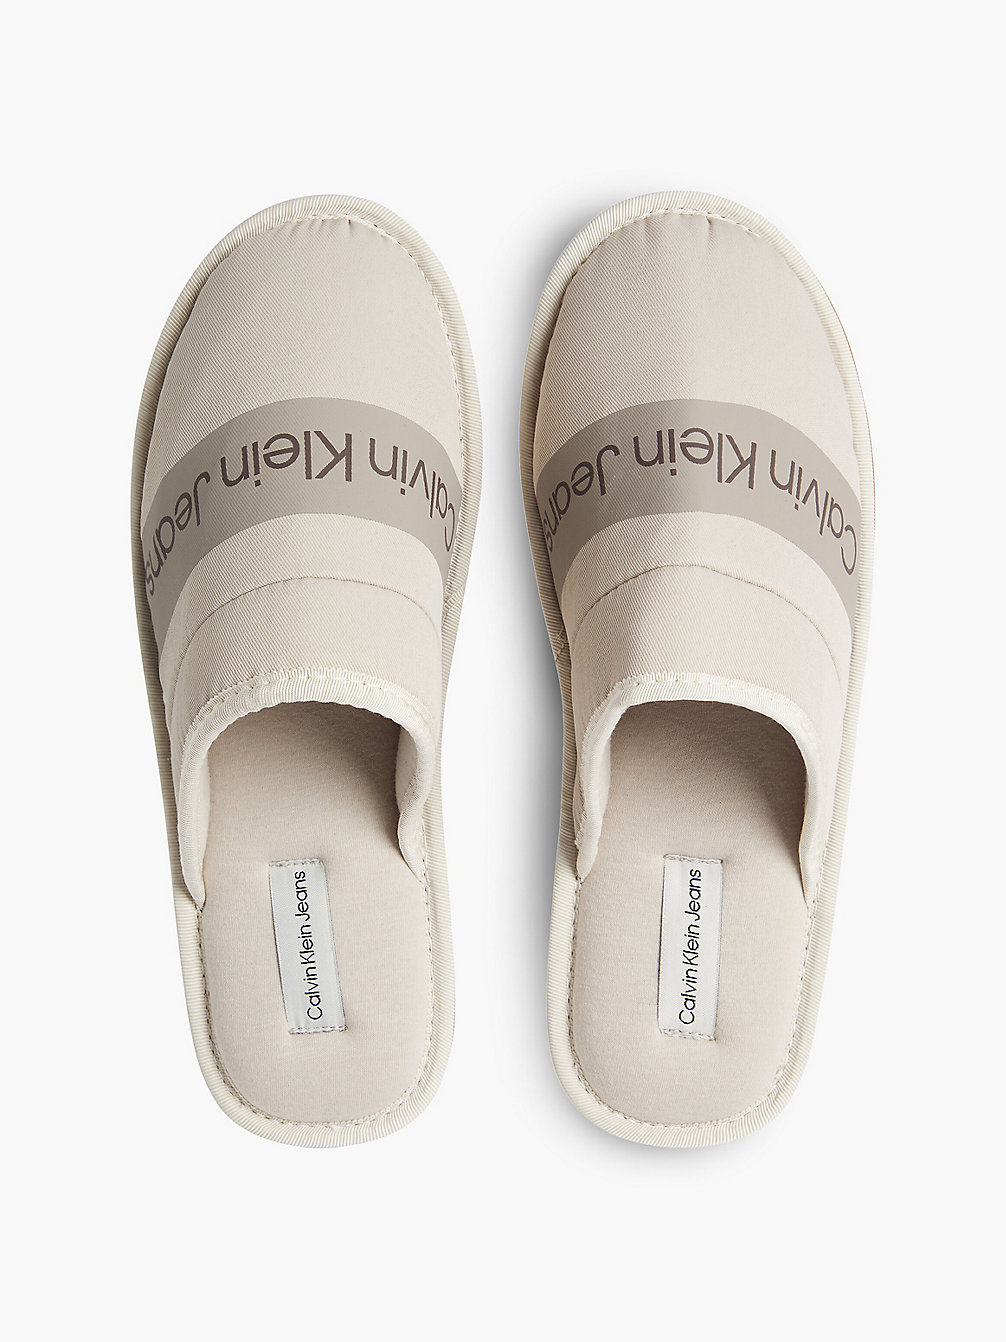 EGGSHELL Recycled Twill Slippers undefined men Calvin Klein